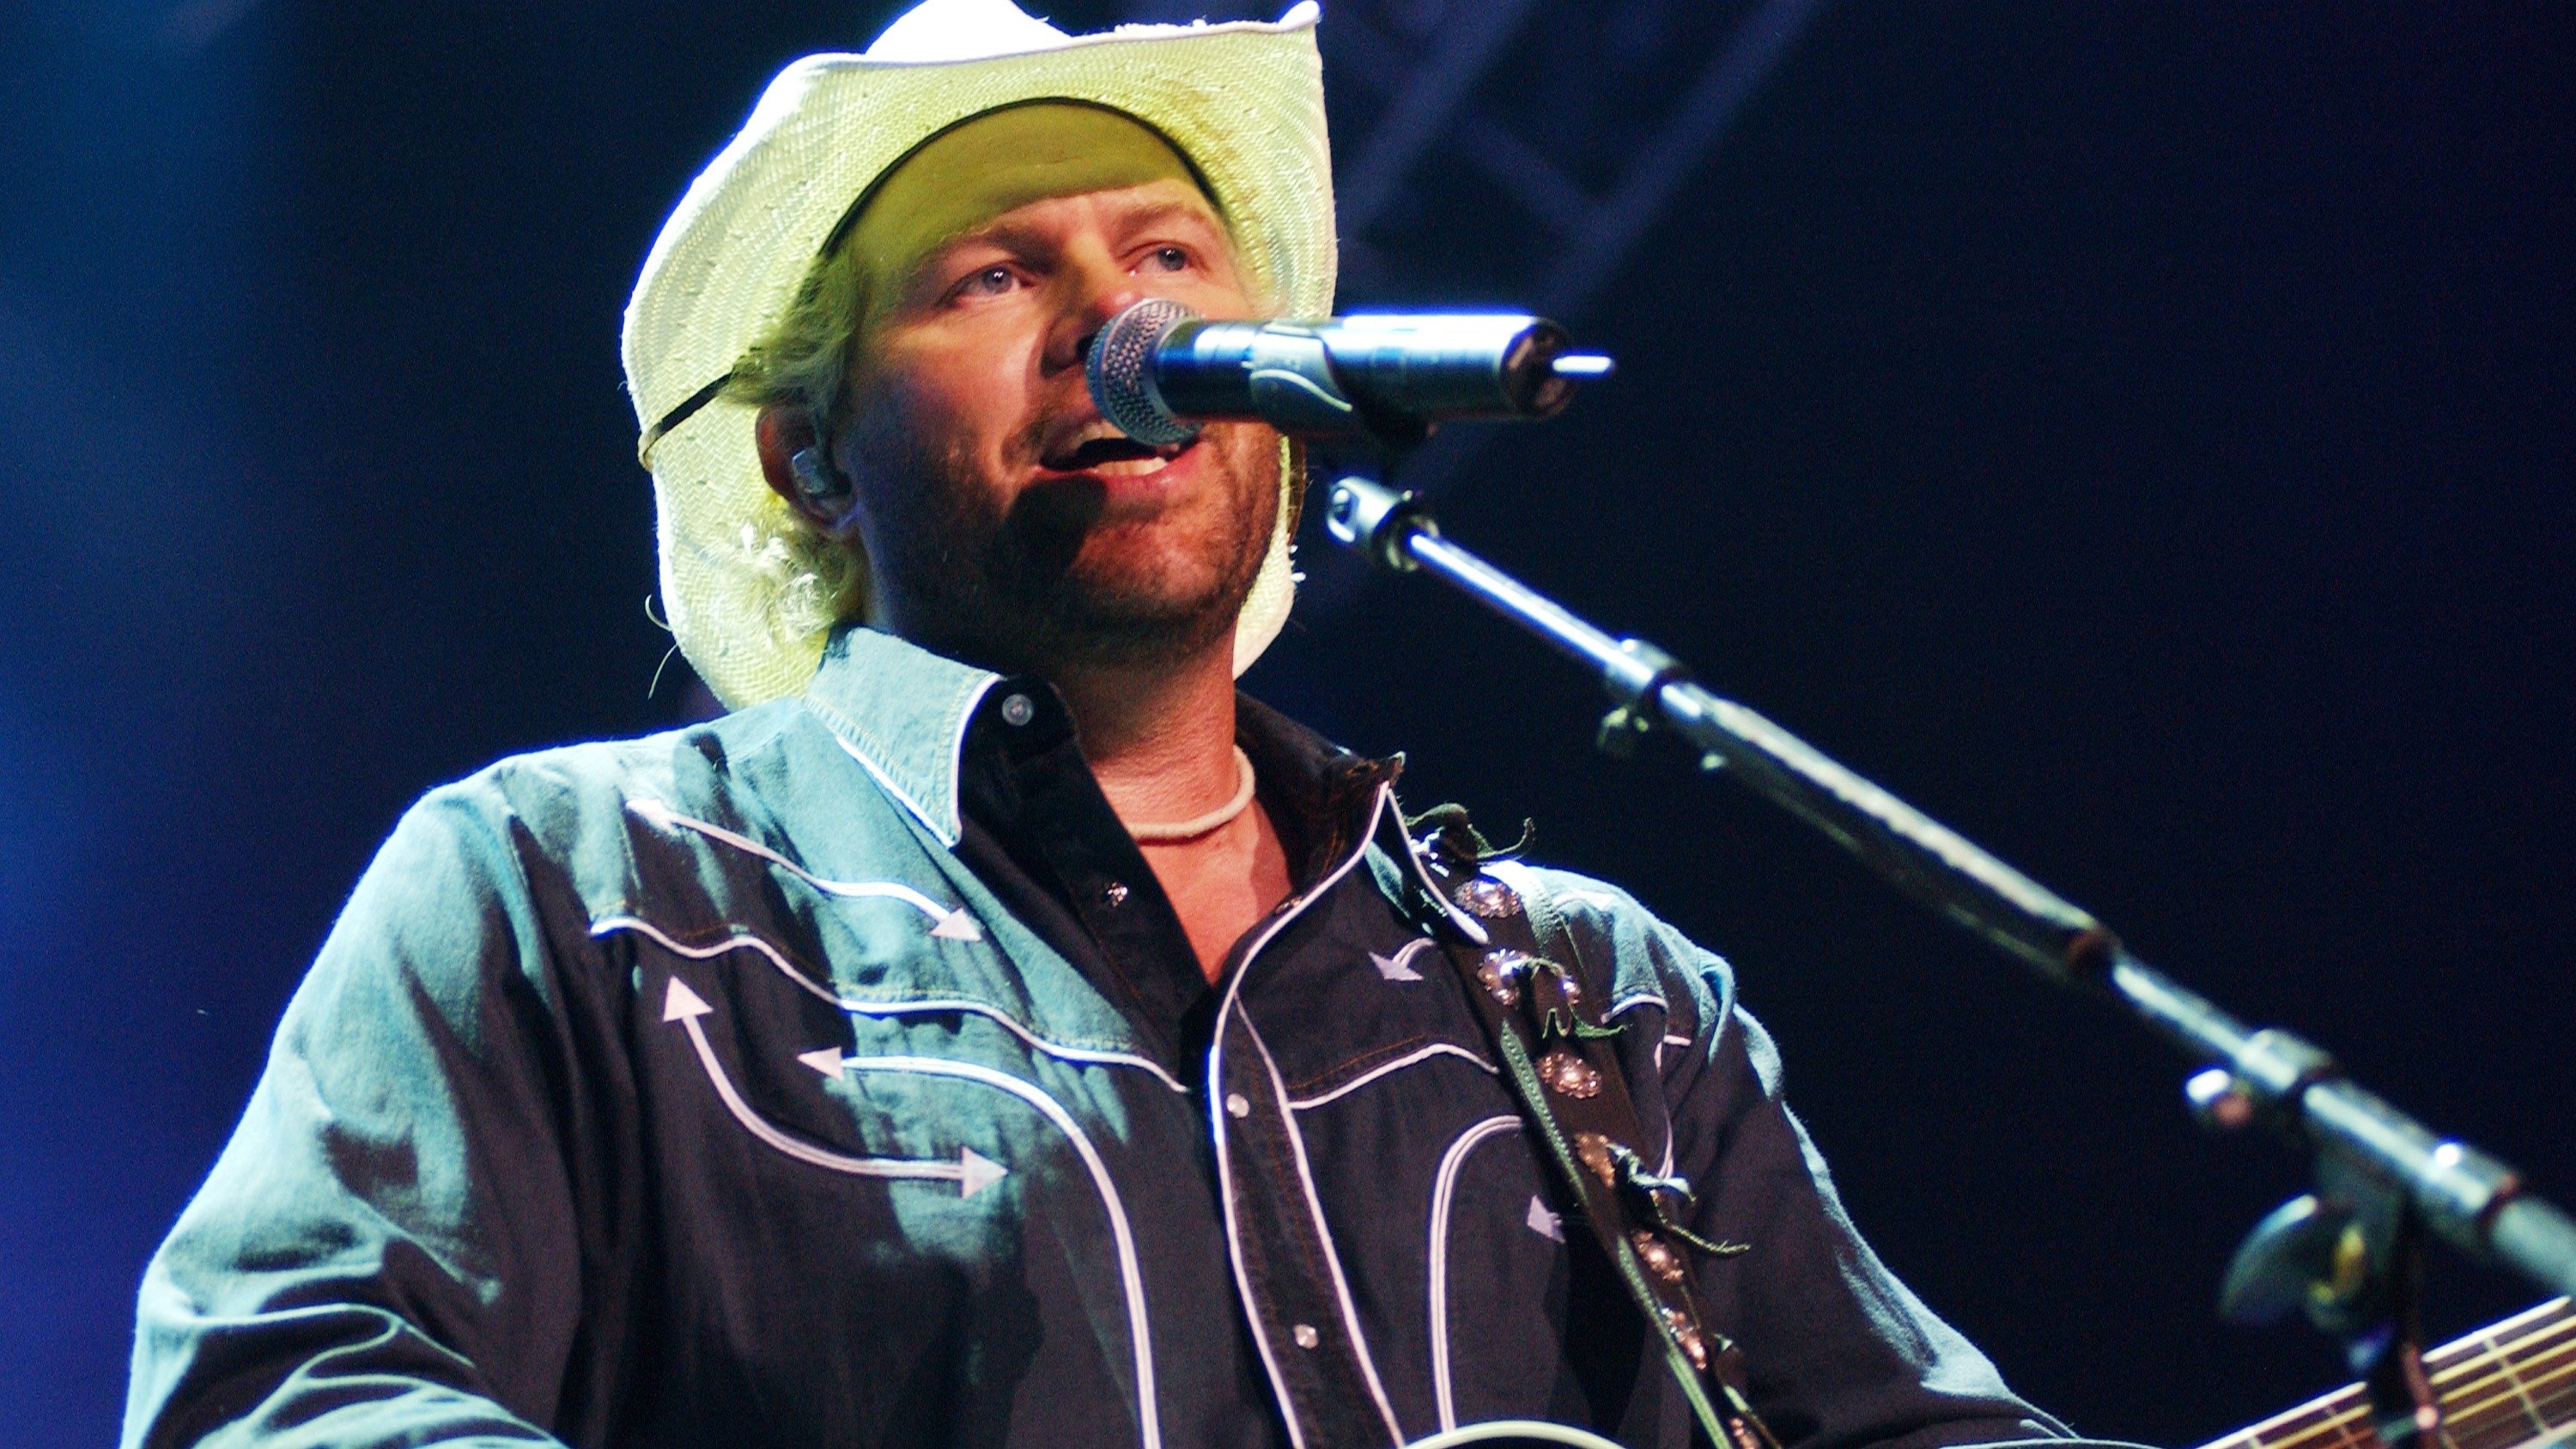 Country Legend Toby Keith Reveals He Has Cancer